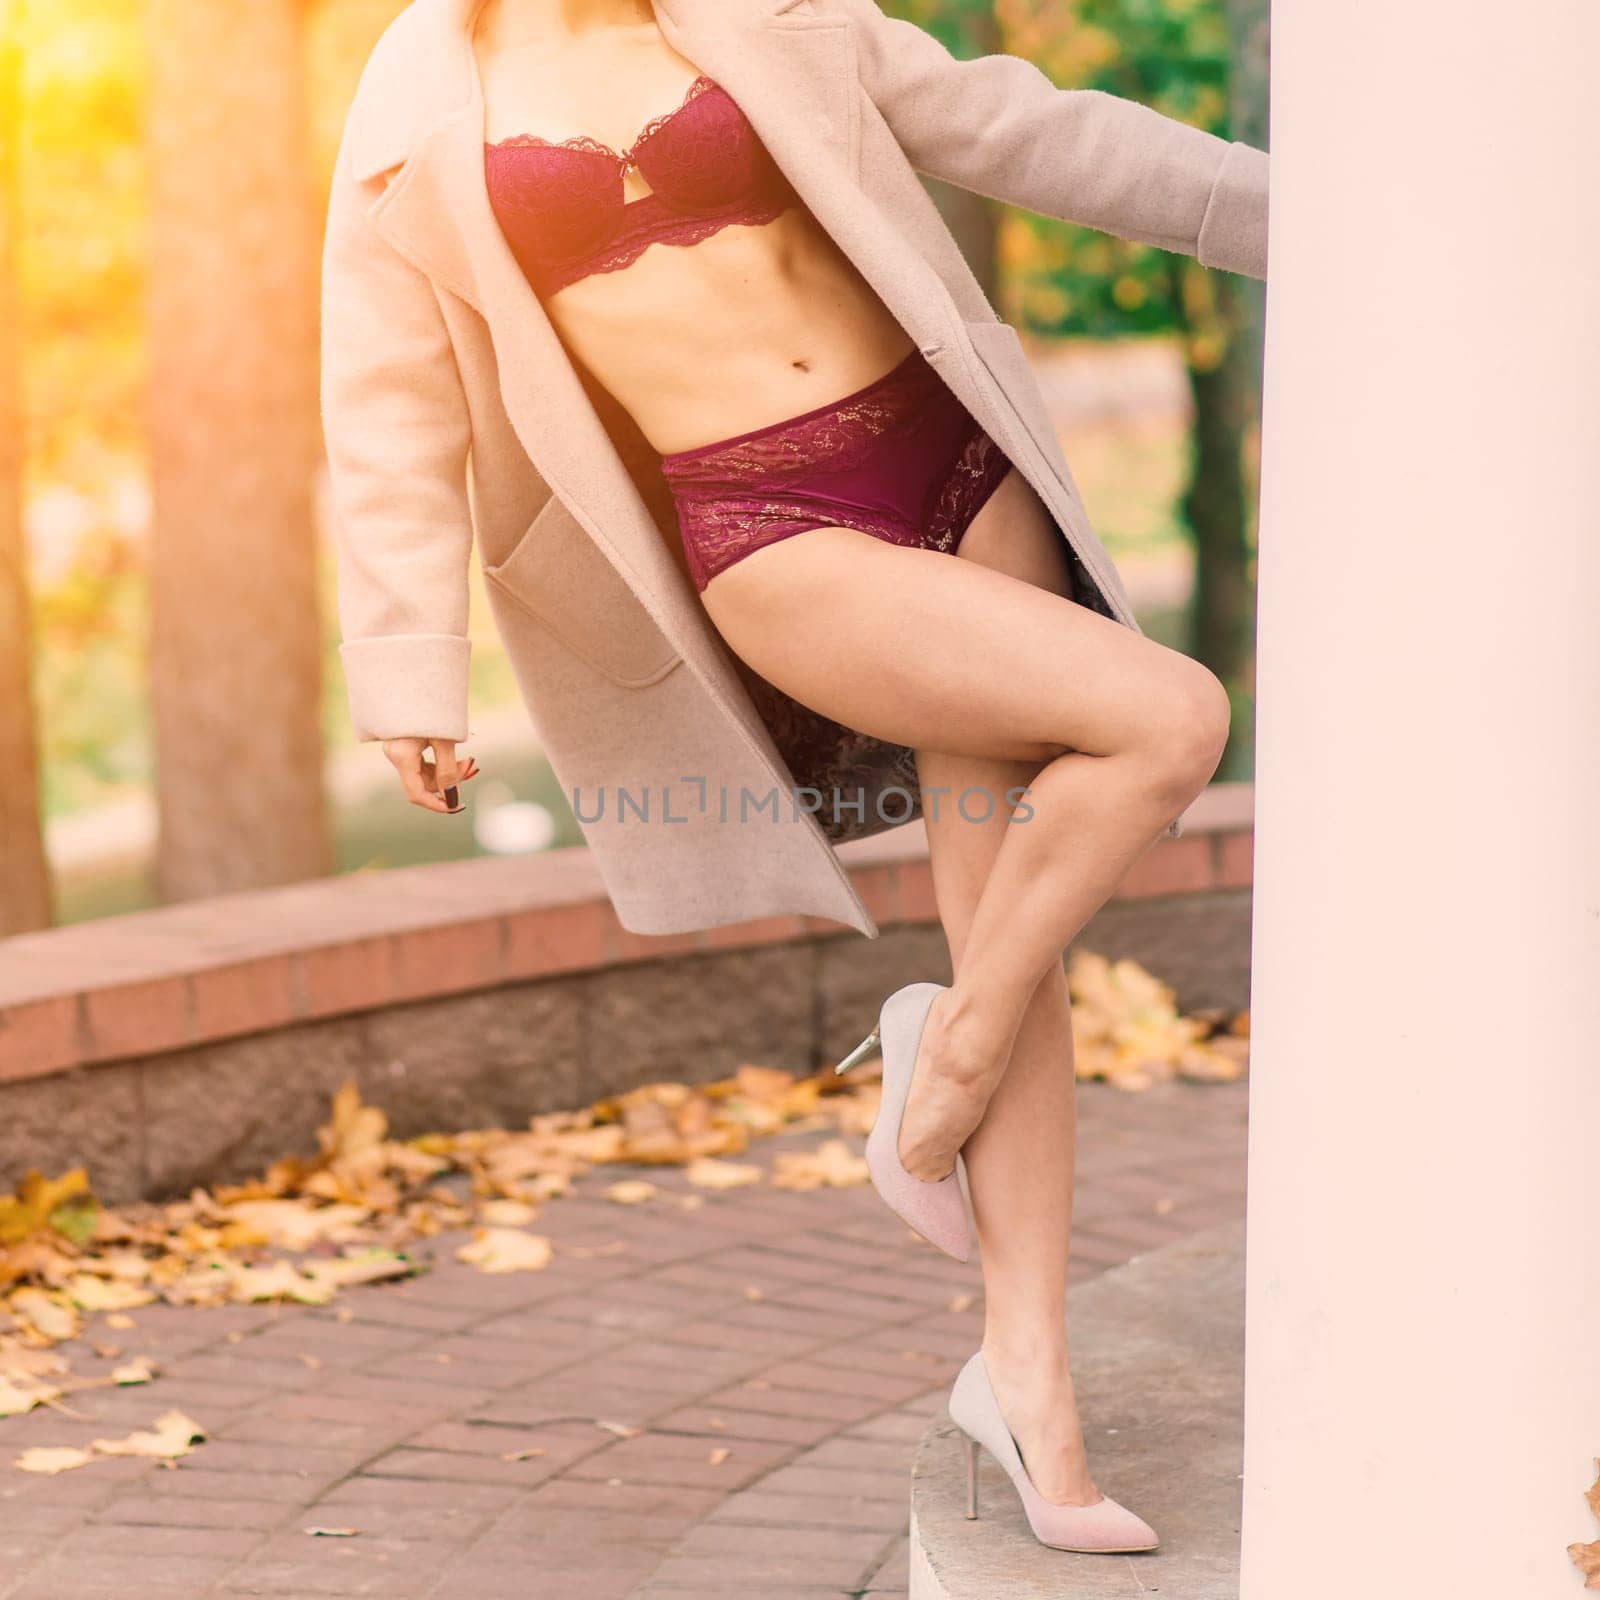 Young beautiful dark-haired woman with a slender figure posing in lingerie and a classic coat in an autumn park